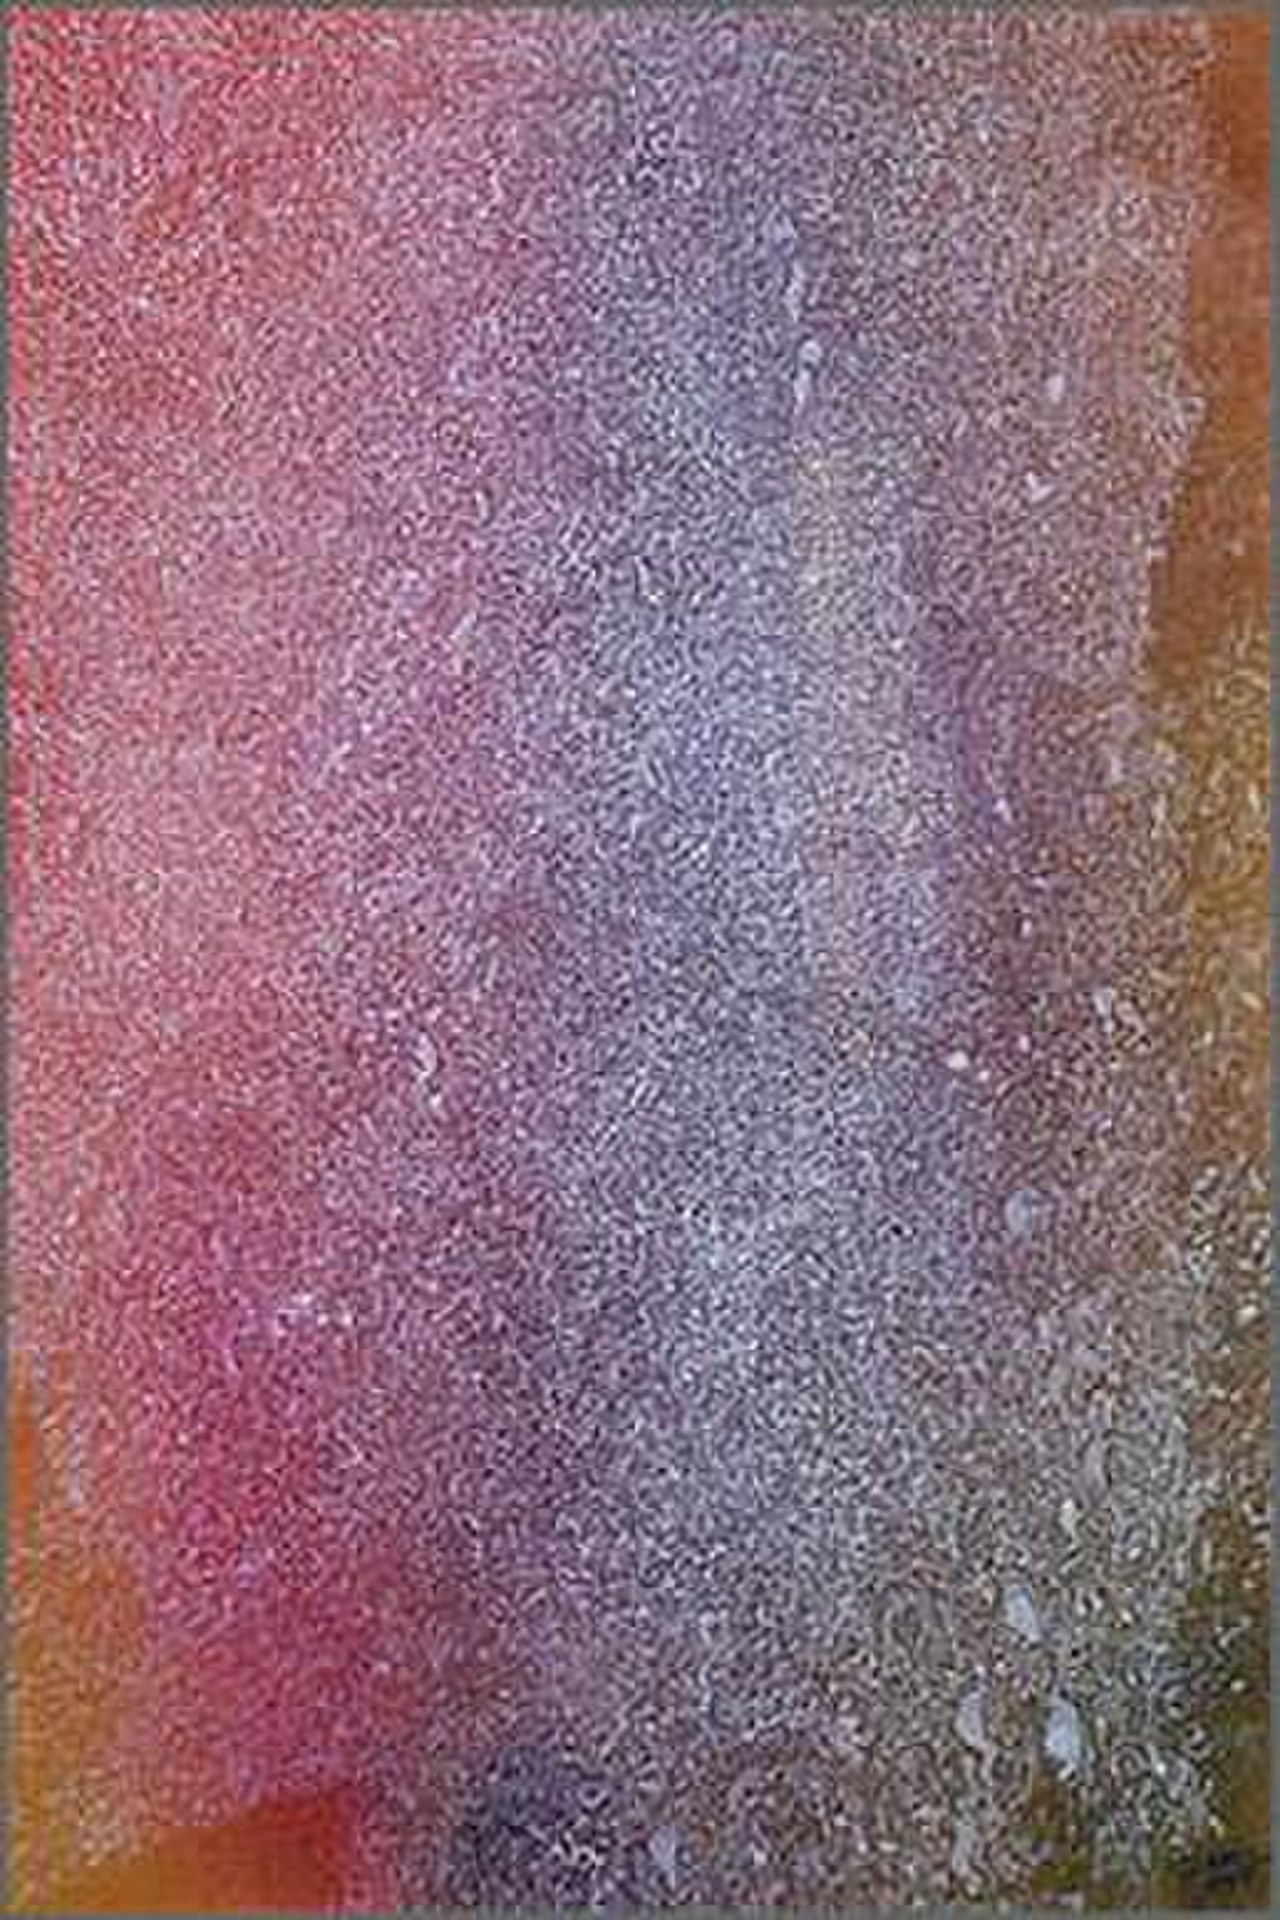 Canticle Mark Tobey 1954